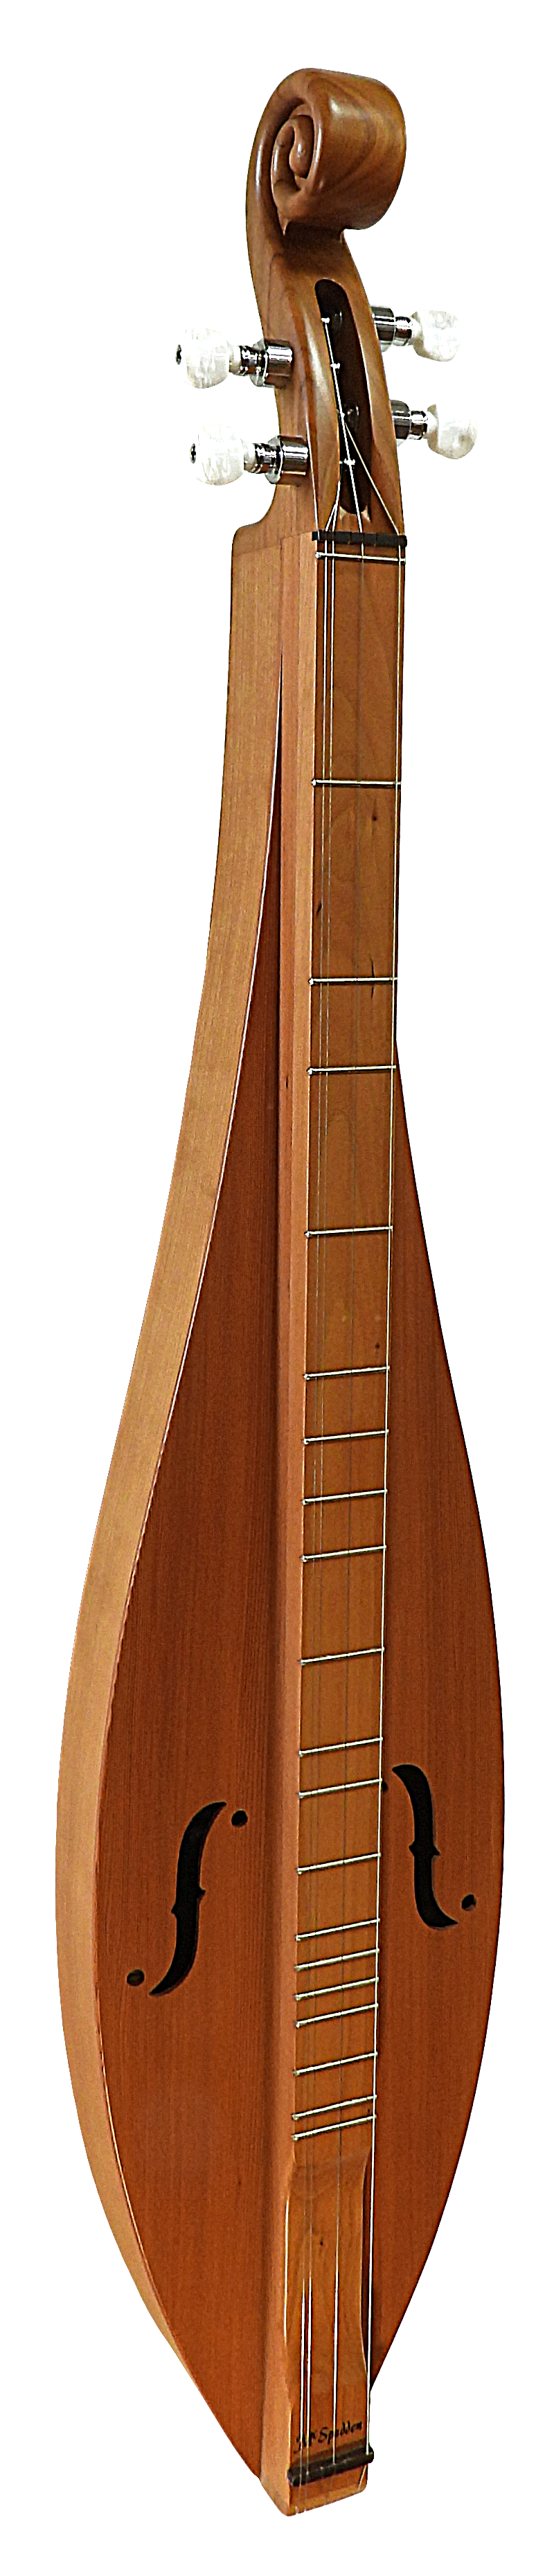 A 4 String, Scroll head, Teardrop with Cherry back and sides, Redwood top (4STCR) Dulcimer, featuring customizable options and a lifetime warranty, displayed on a white background.